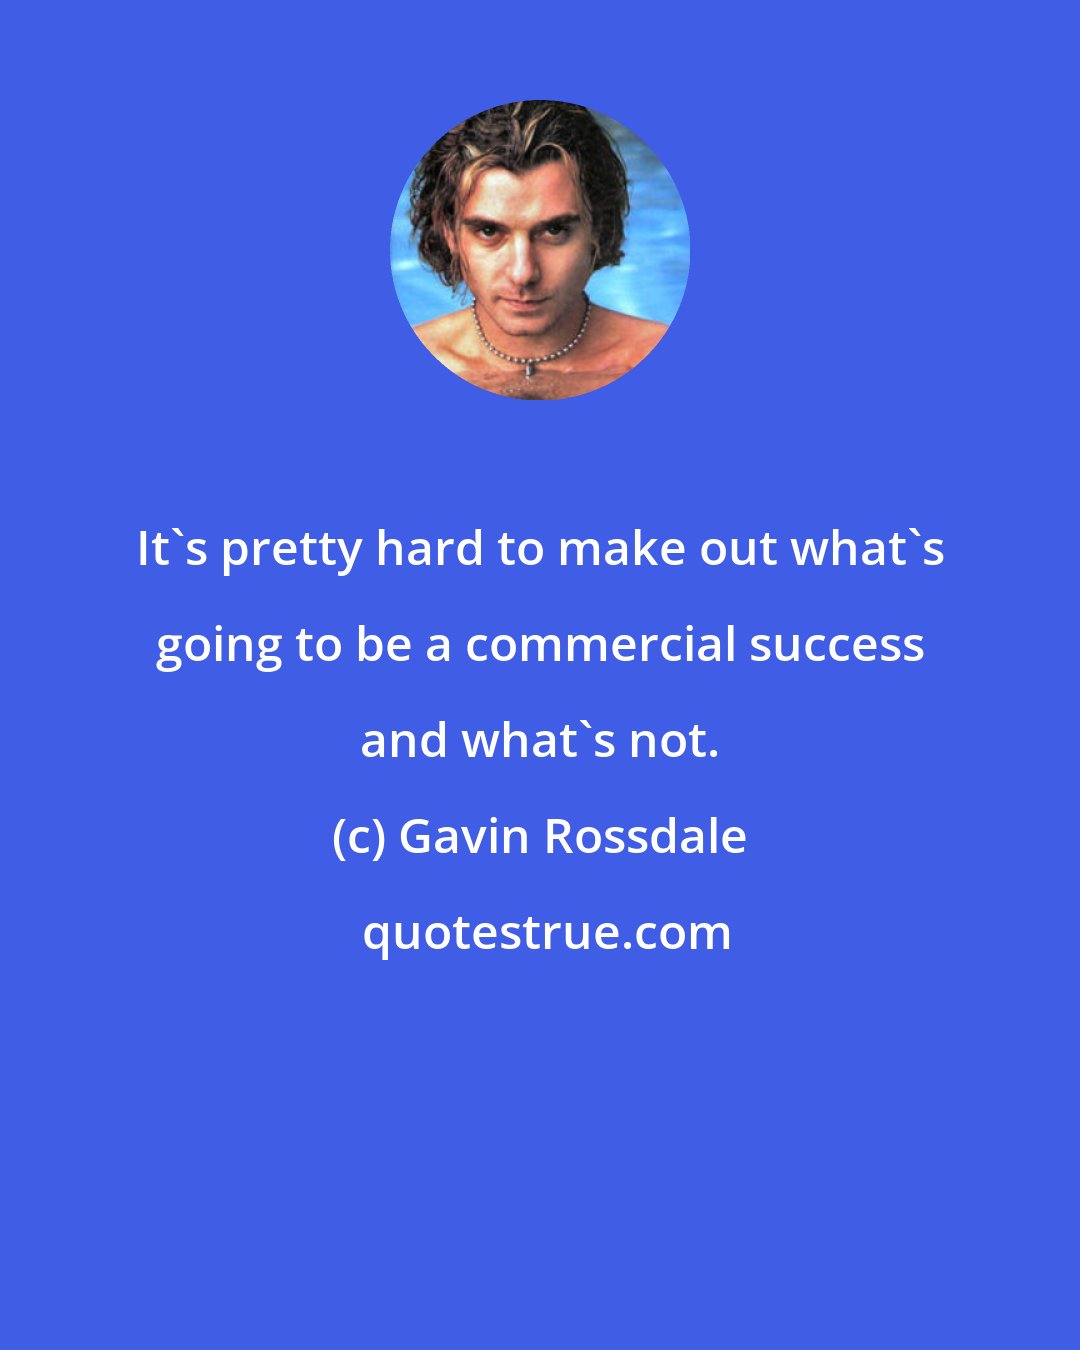 Gavin Rossdale: It's pretty hard to make out what's going to be a commercial success and what's not.